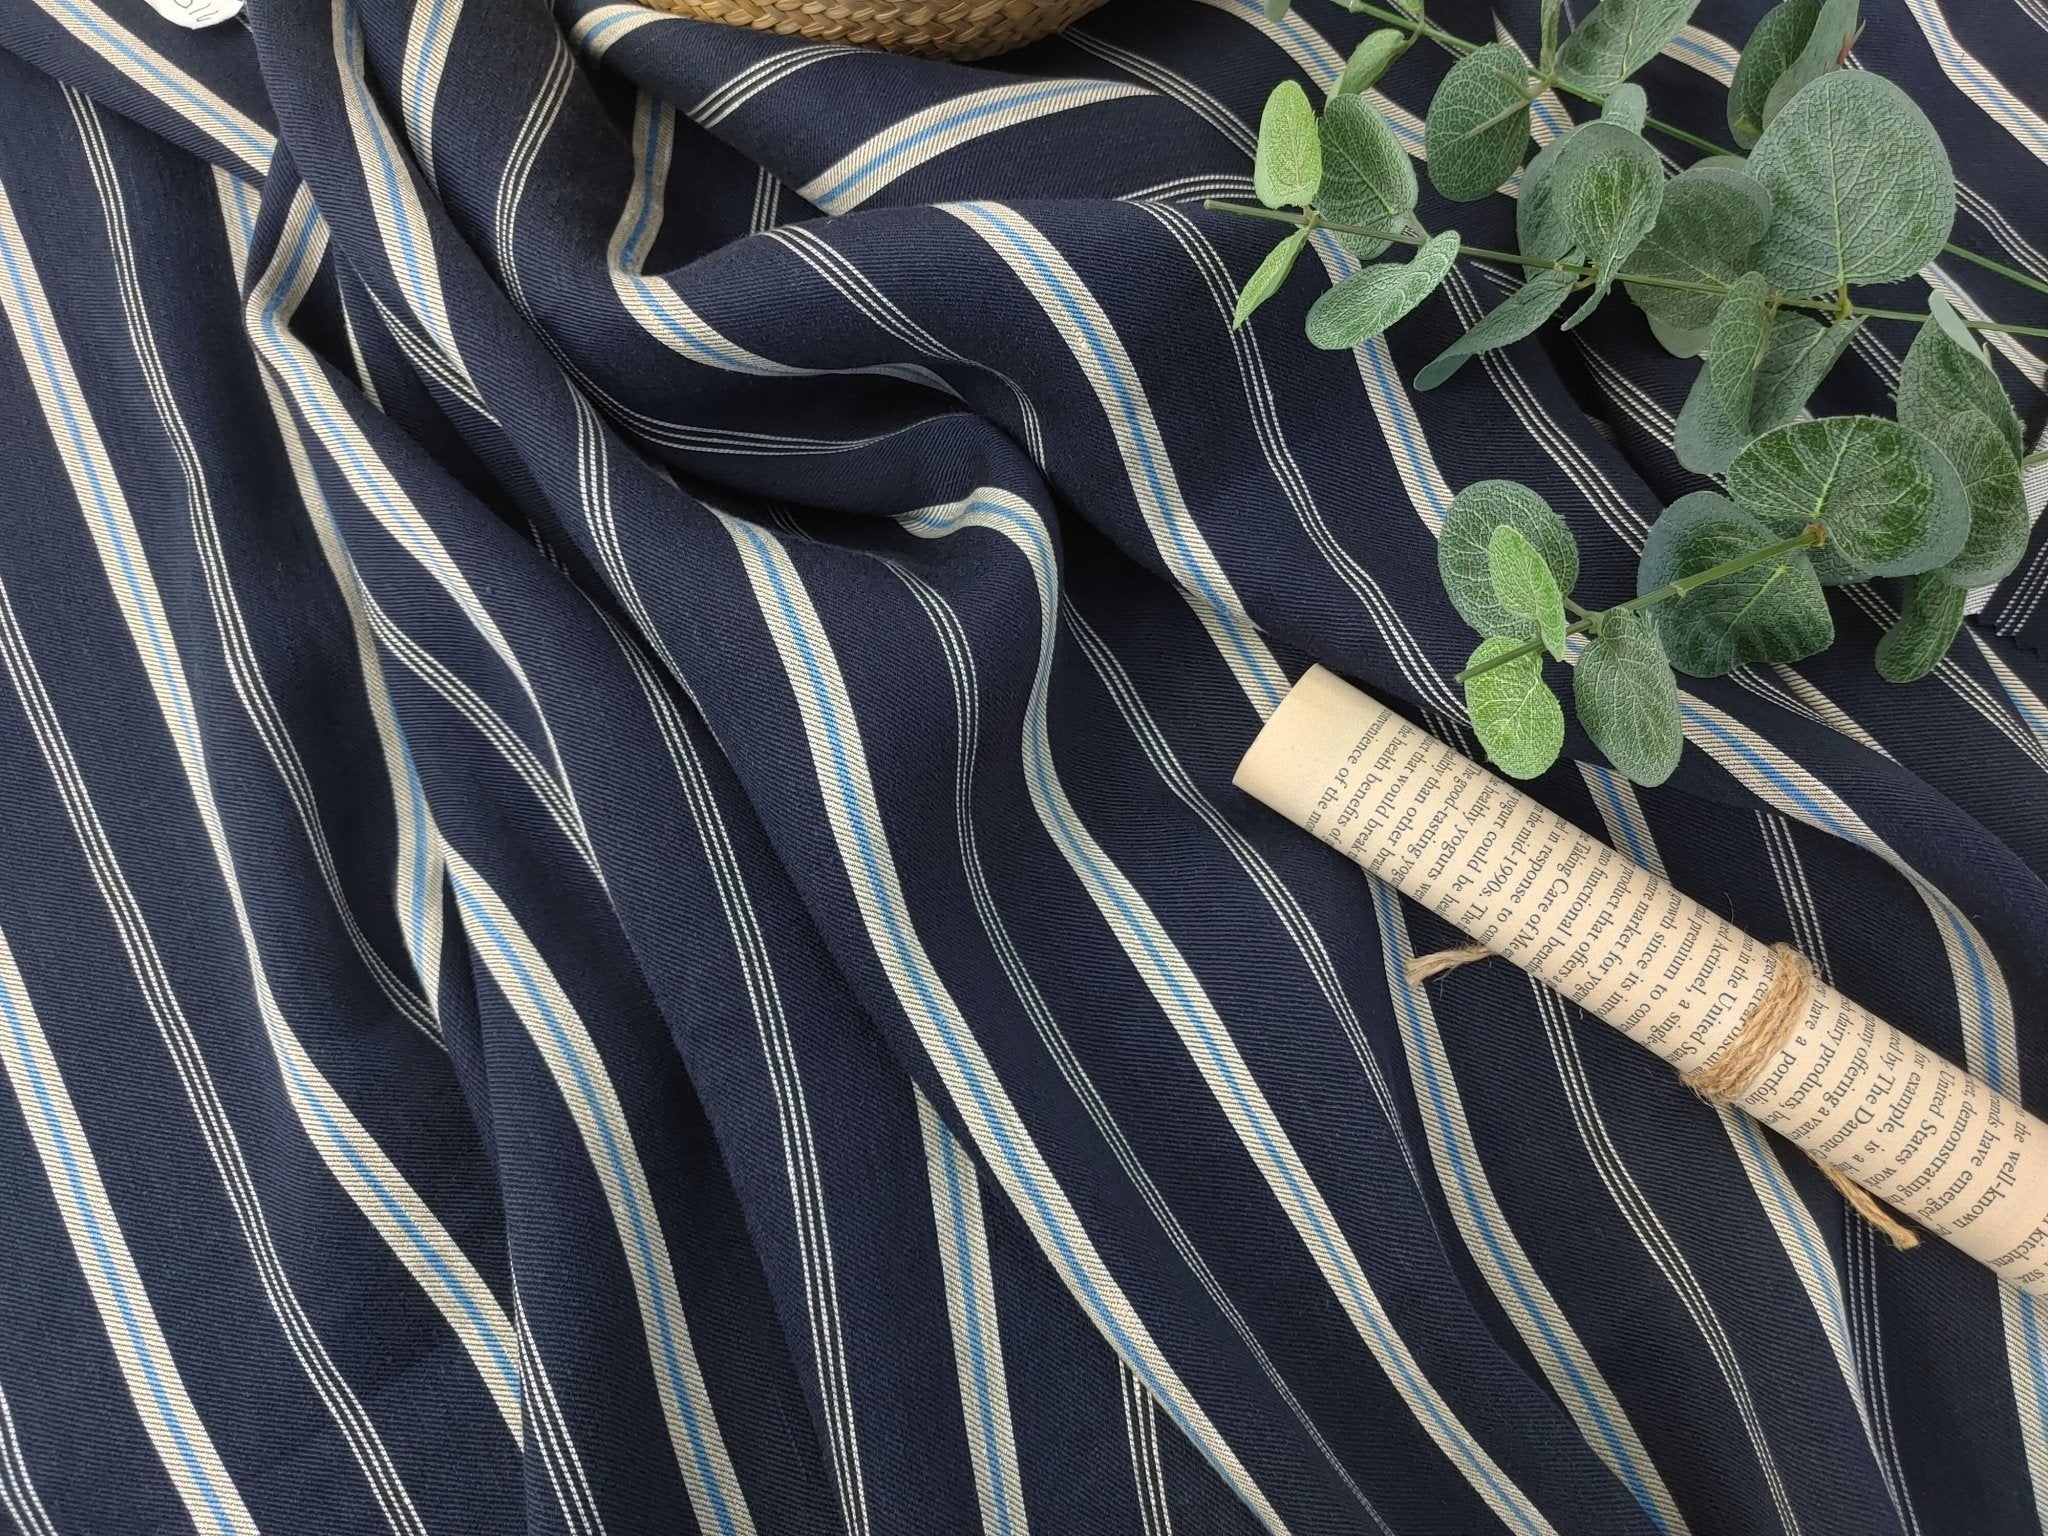 Linen Rayon Twill Fabric with Stripe Pattern, Subtle Glossy Effect 6809 6810 7154 - The Linen Lab - Ivory